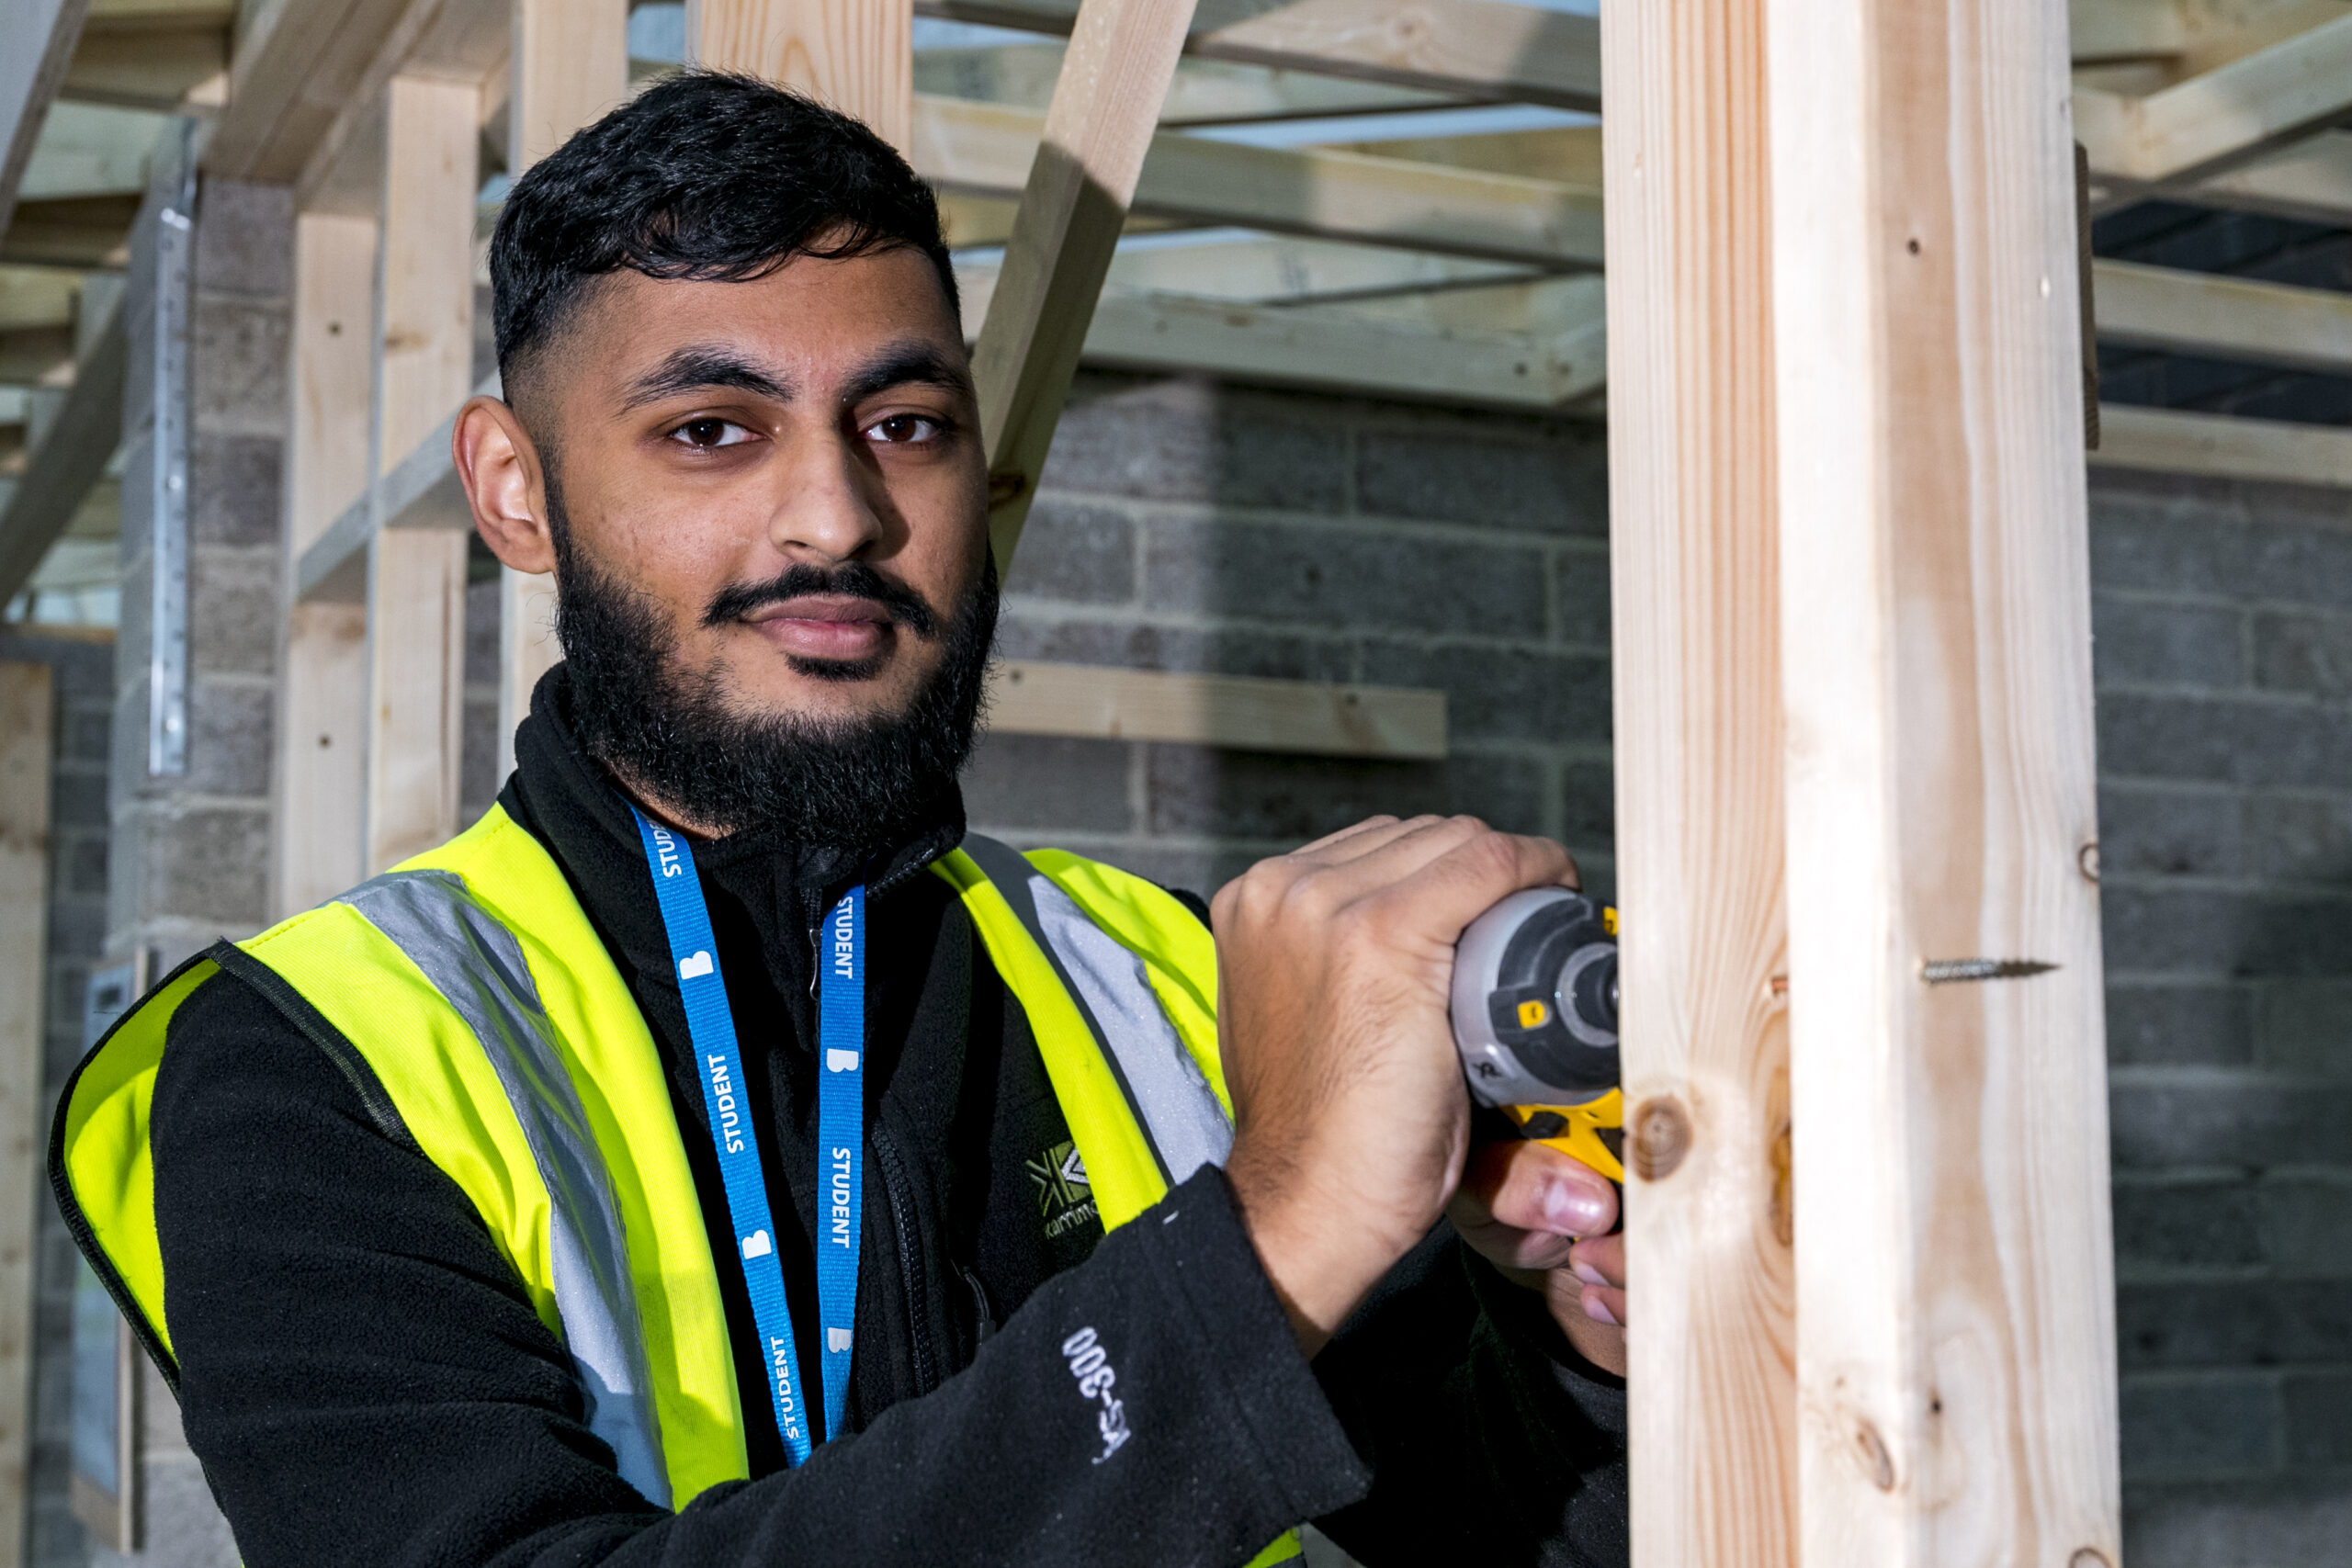 Certificate in Construction – Carpentry and Joinery 19+